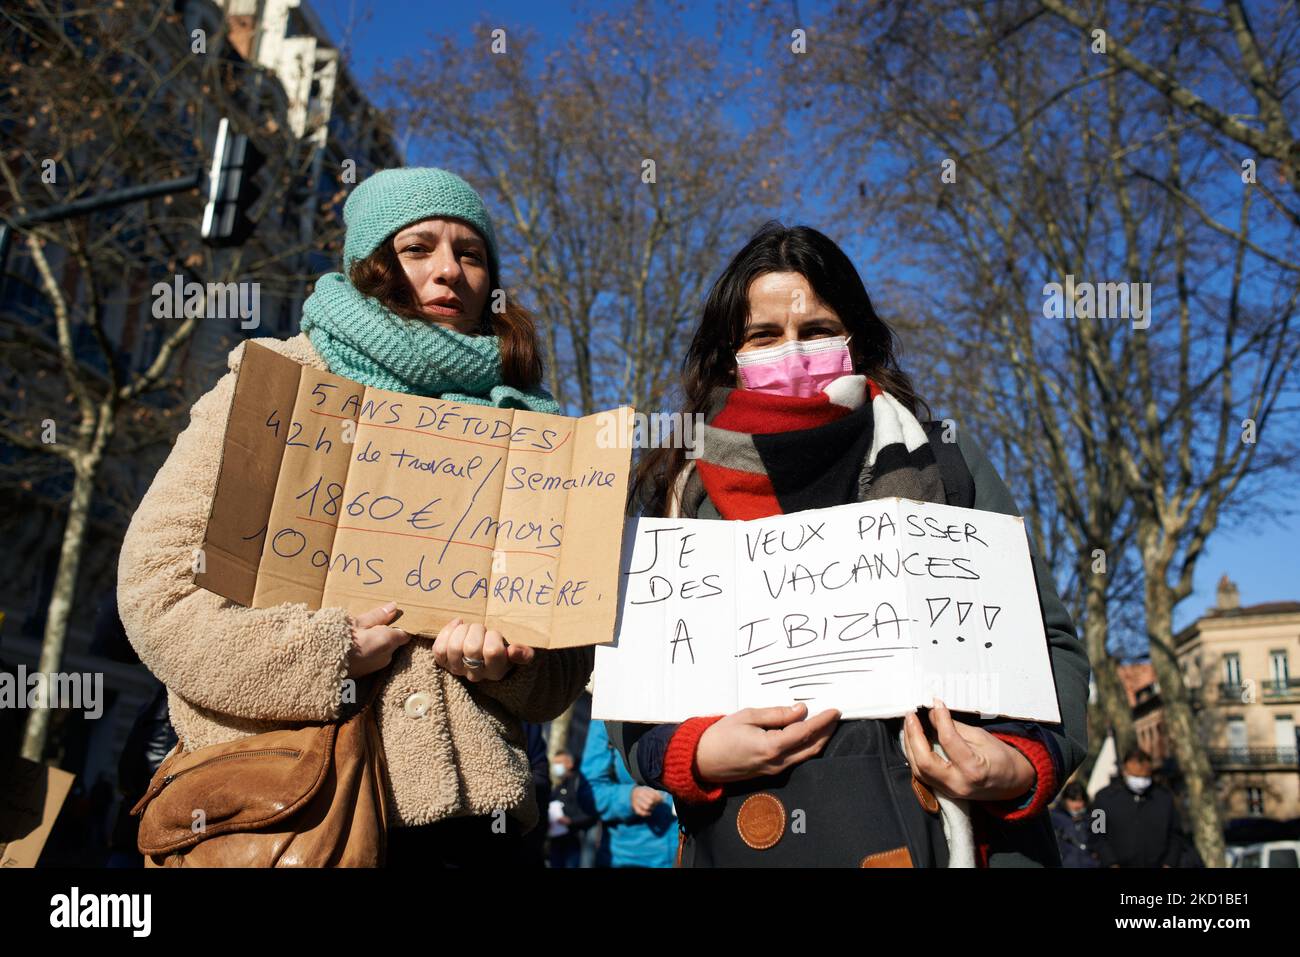 Two woman hold placard reading '5 years of studying, 42h hours per week; €1260 wage, 10 years of career' (Left) and 'I want to go on holidays in Ibiza' (right). Between 3000 and 4000 people demonstrated in the streets of Toulouse called by nearly all trade unions(CGT, FSU, SUD, FO). A lot of people from the National Education were there (teachers, AESH, etc.)still angered by the conduct of Education Ministter J.-M. Blanquer who announced the new sanitary protocols from its holidays in Ibiza the day before the retruen of christmas holidays. Protesters demand better wages, better working conditi Stock Photo